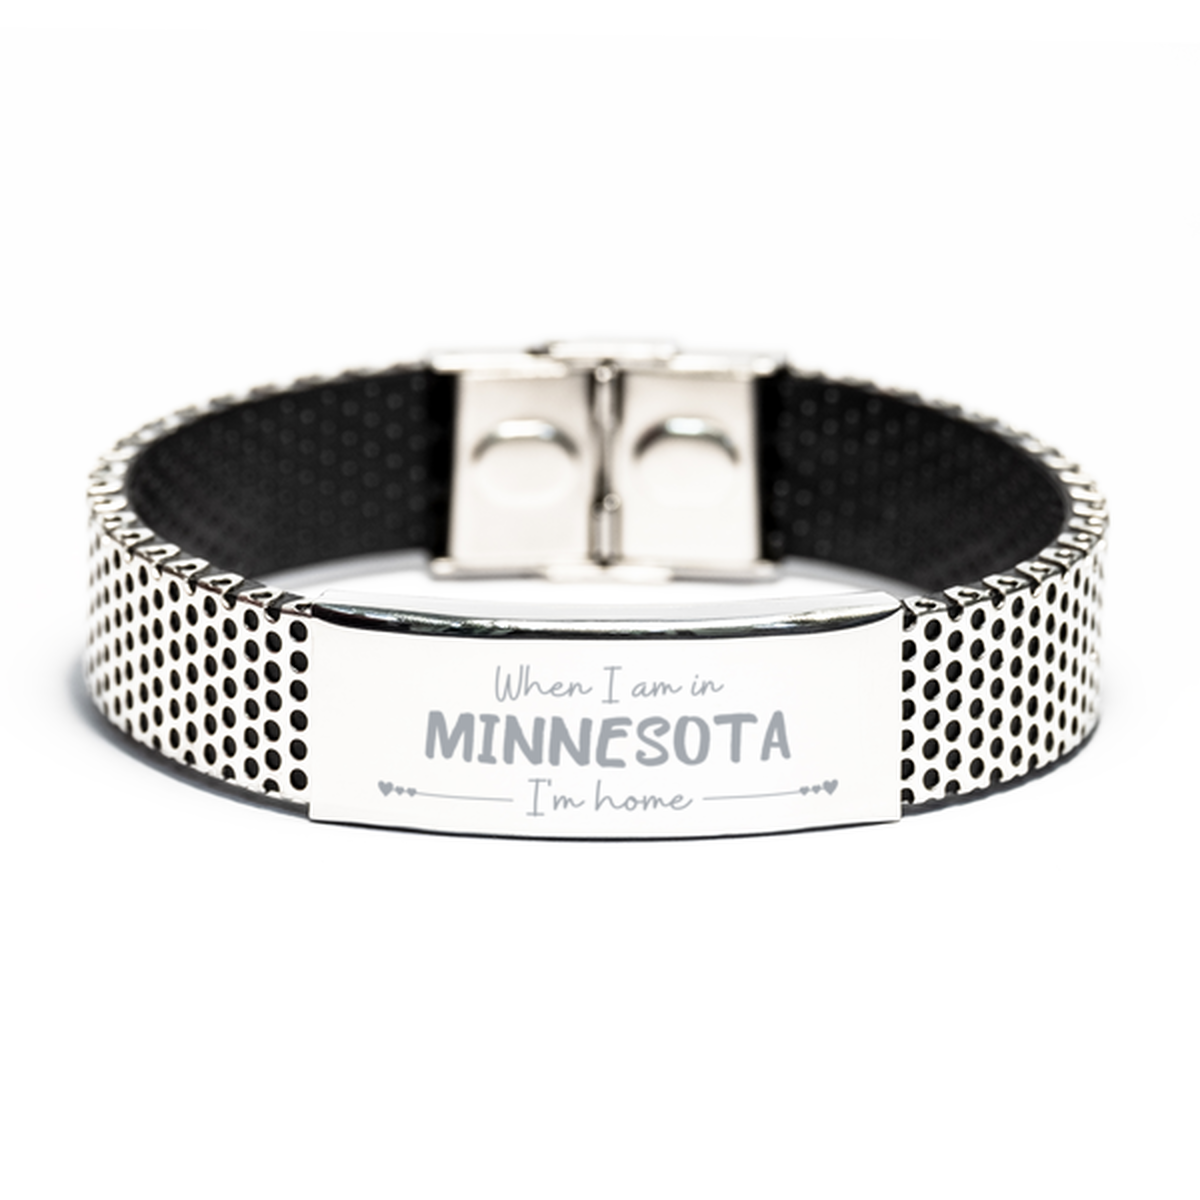 When I am in Minnesota I'm home Stainless Steel Bracelet, Cheap Gifts For Minnesota, State Minnesota Birthday Gifts for Friends Coworker